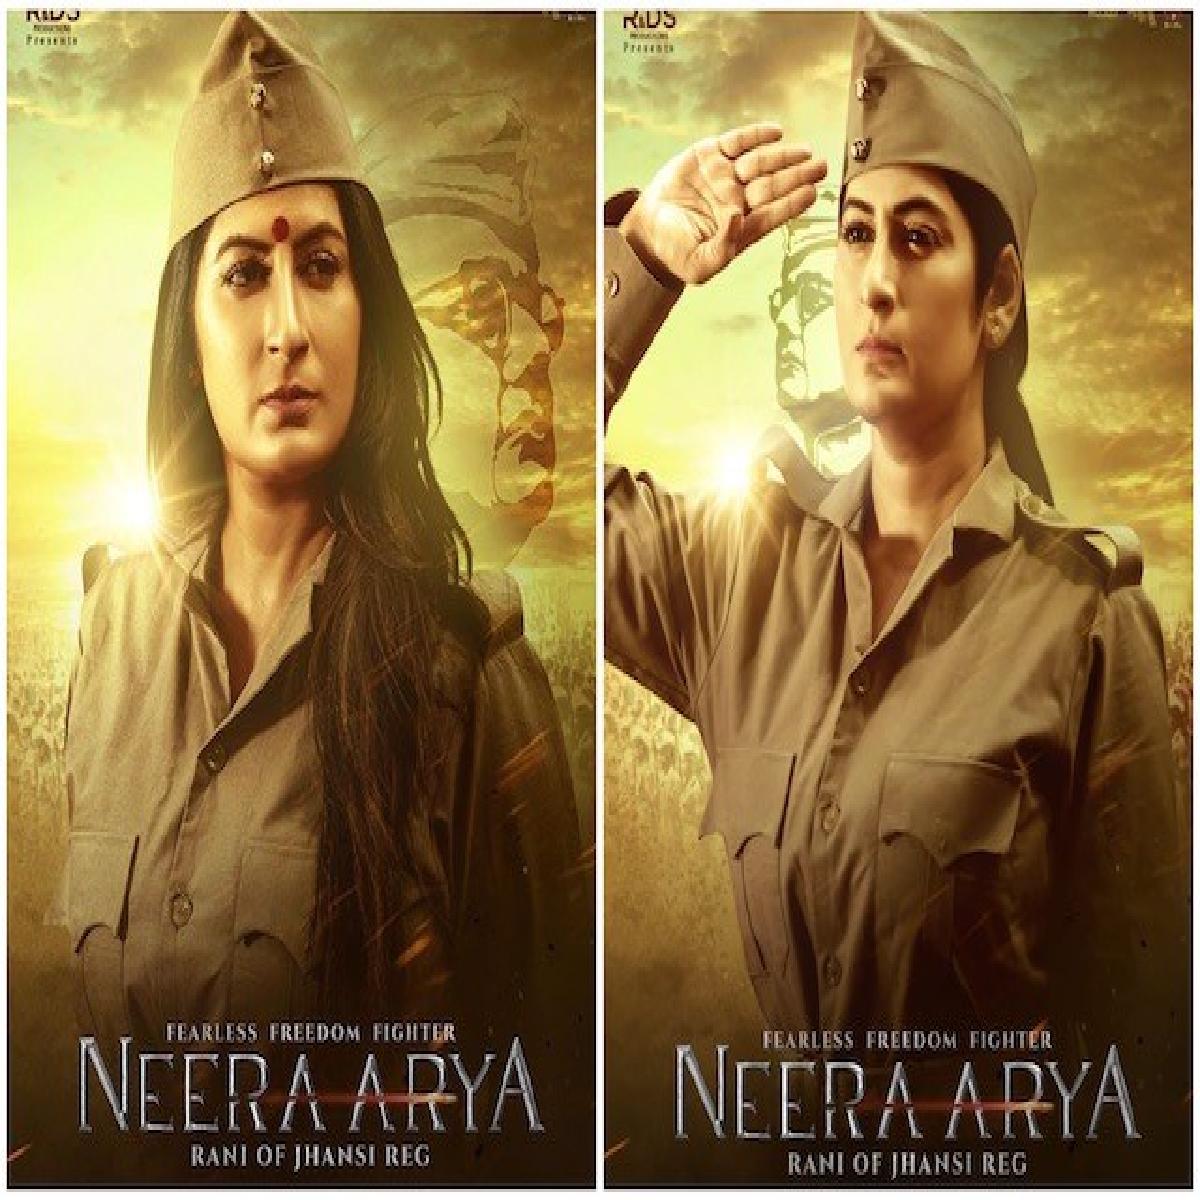 Neera Arya Motion Poster Is Out